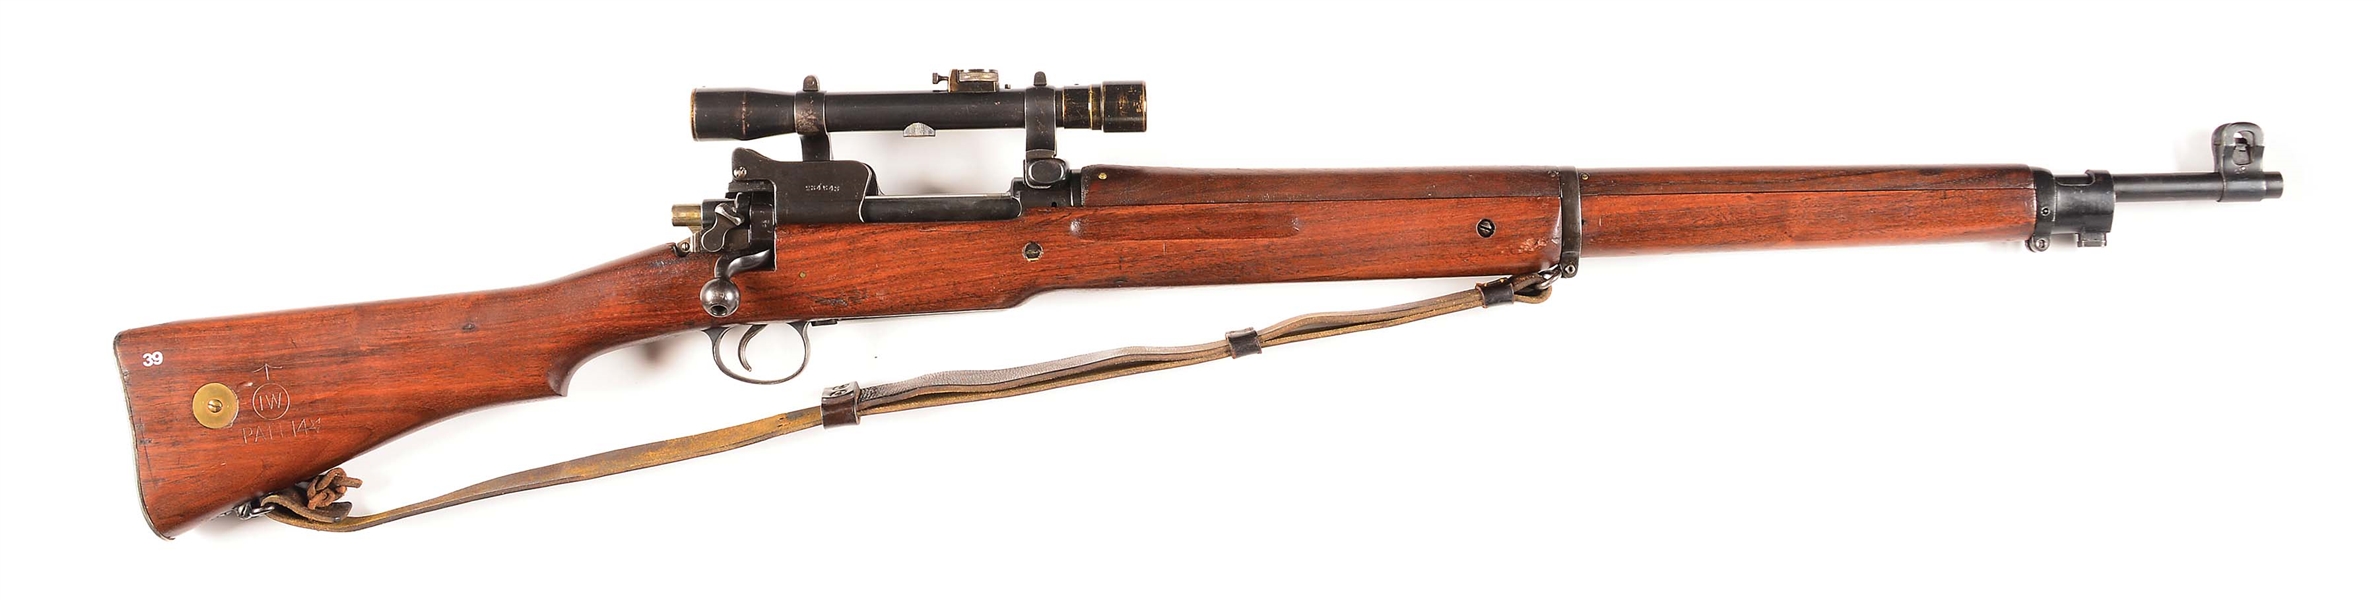 (C) SELDOM ENCOUNTERED WINCHESTER MANUFACTURED BRITISH P14 MK I*W(T) BOLT ACTION SNIPER RIFLE WITH "1918" DATED OPTIC.